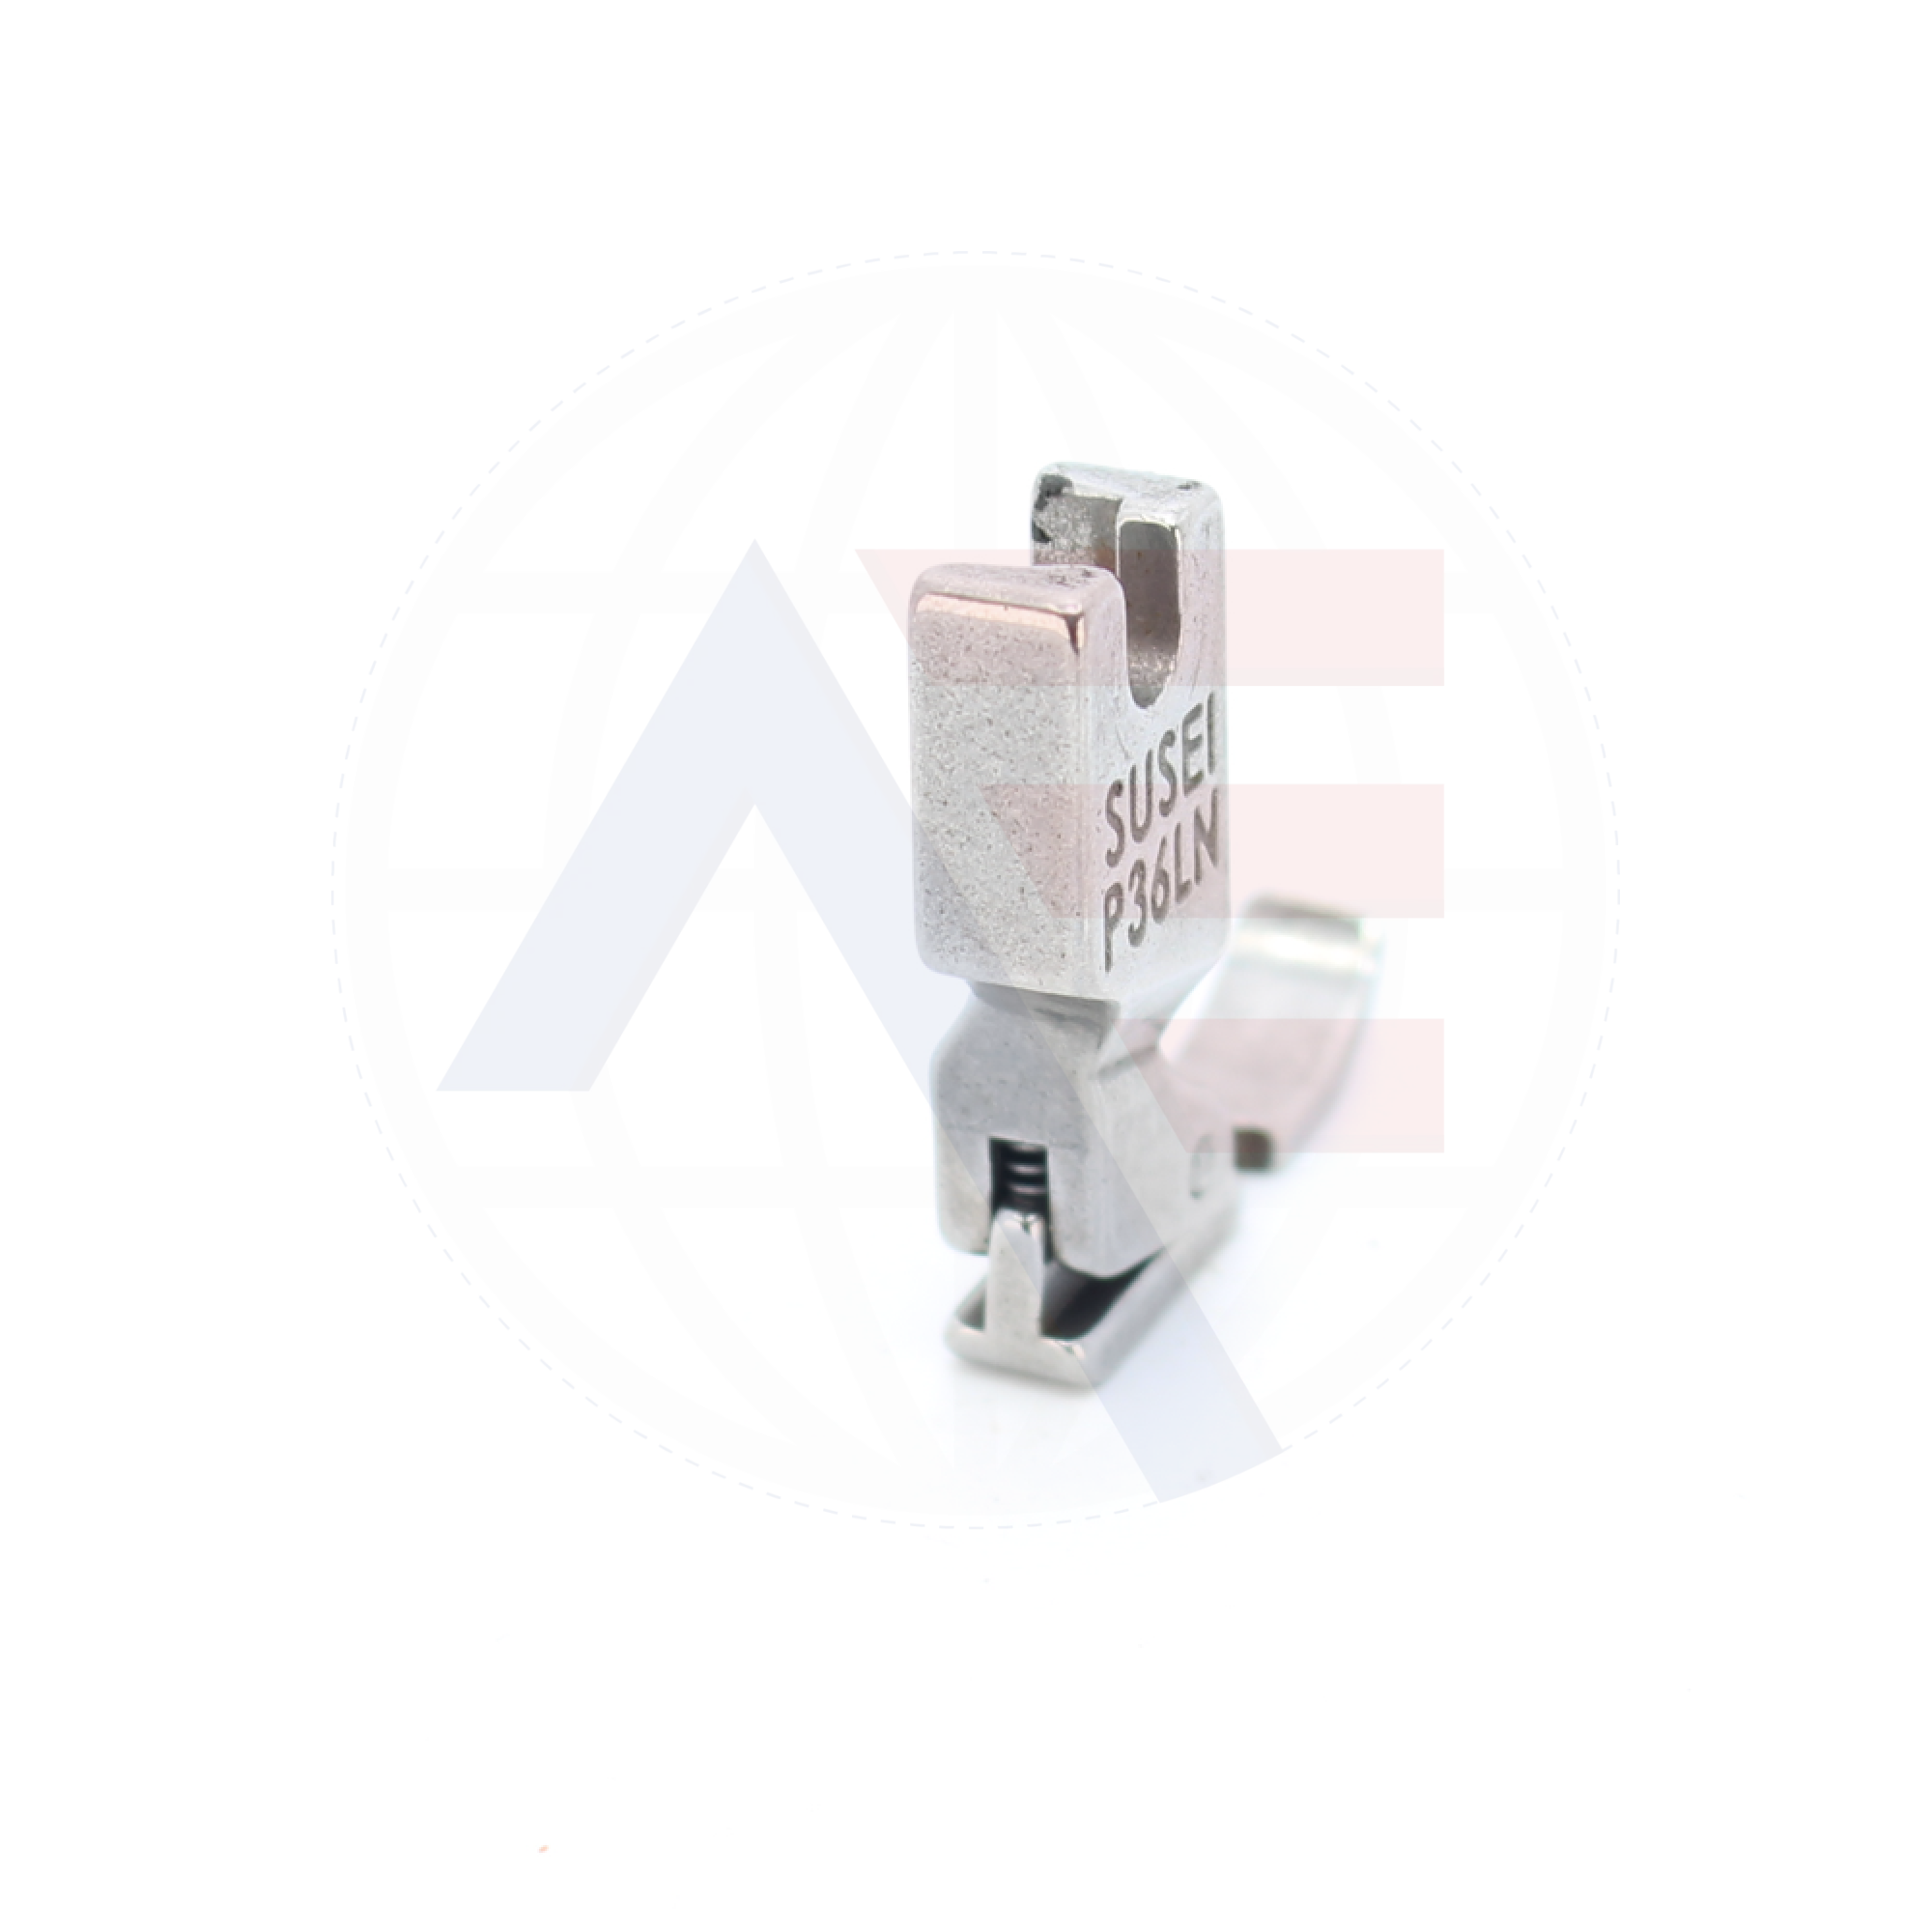 P36Ln Zip Foot Sewing Machine Spare Parts